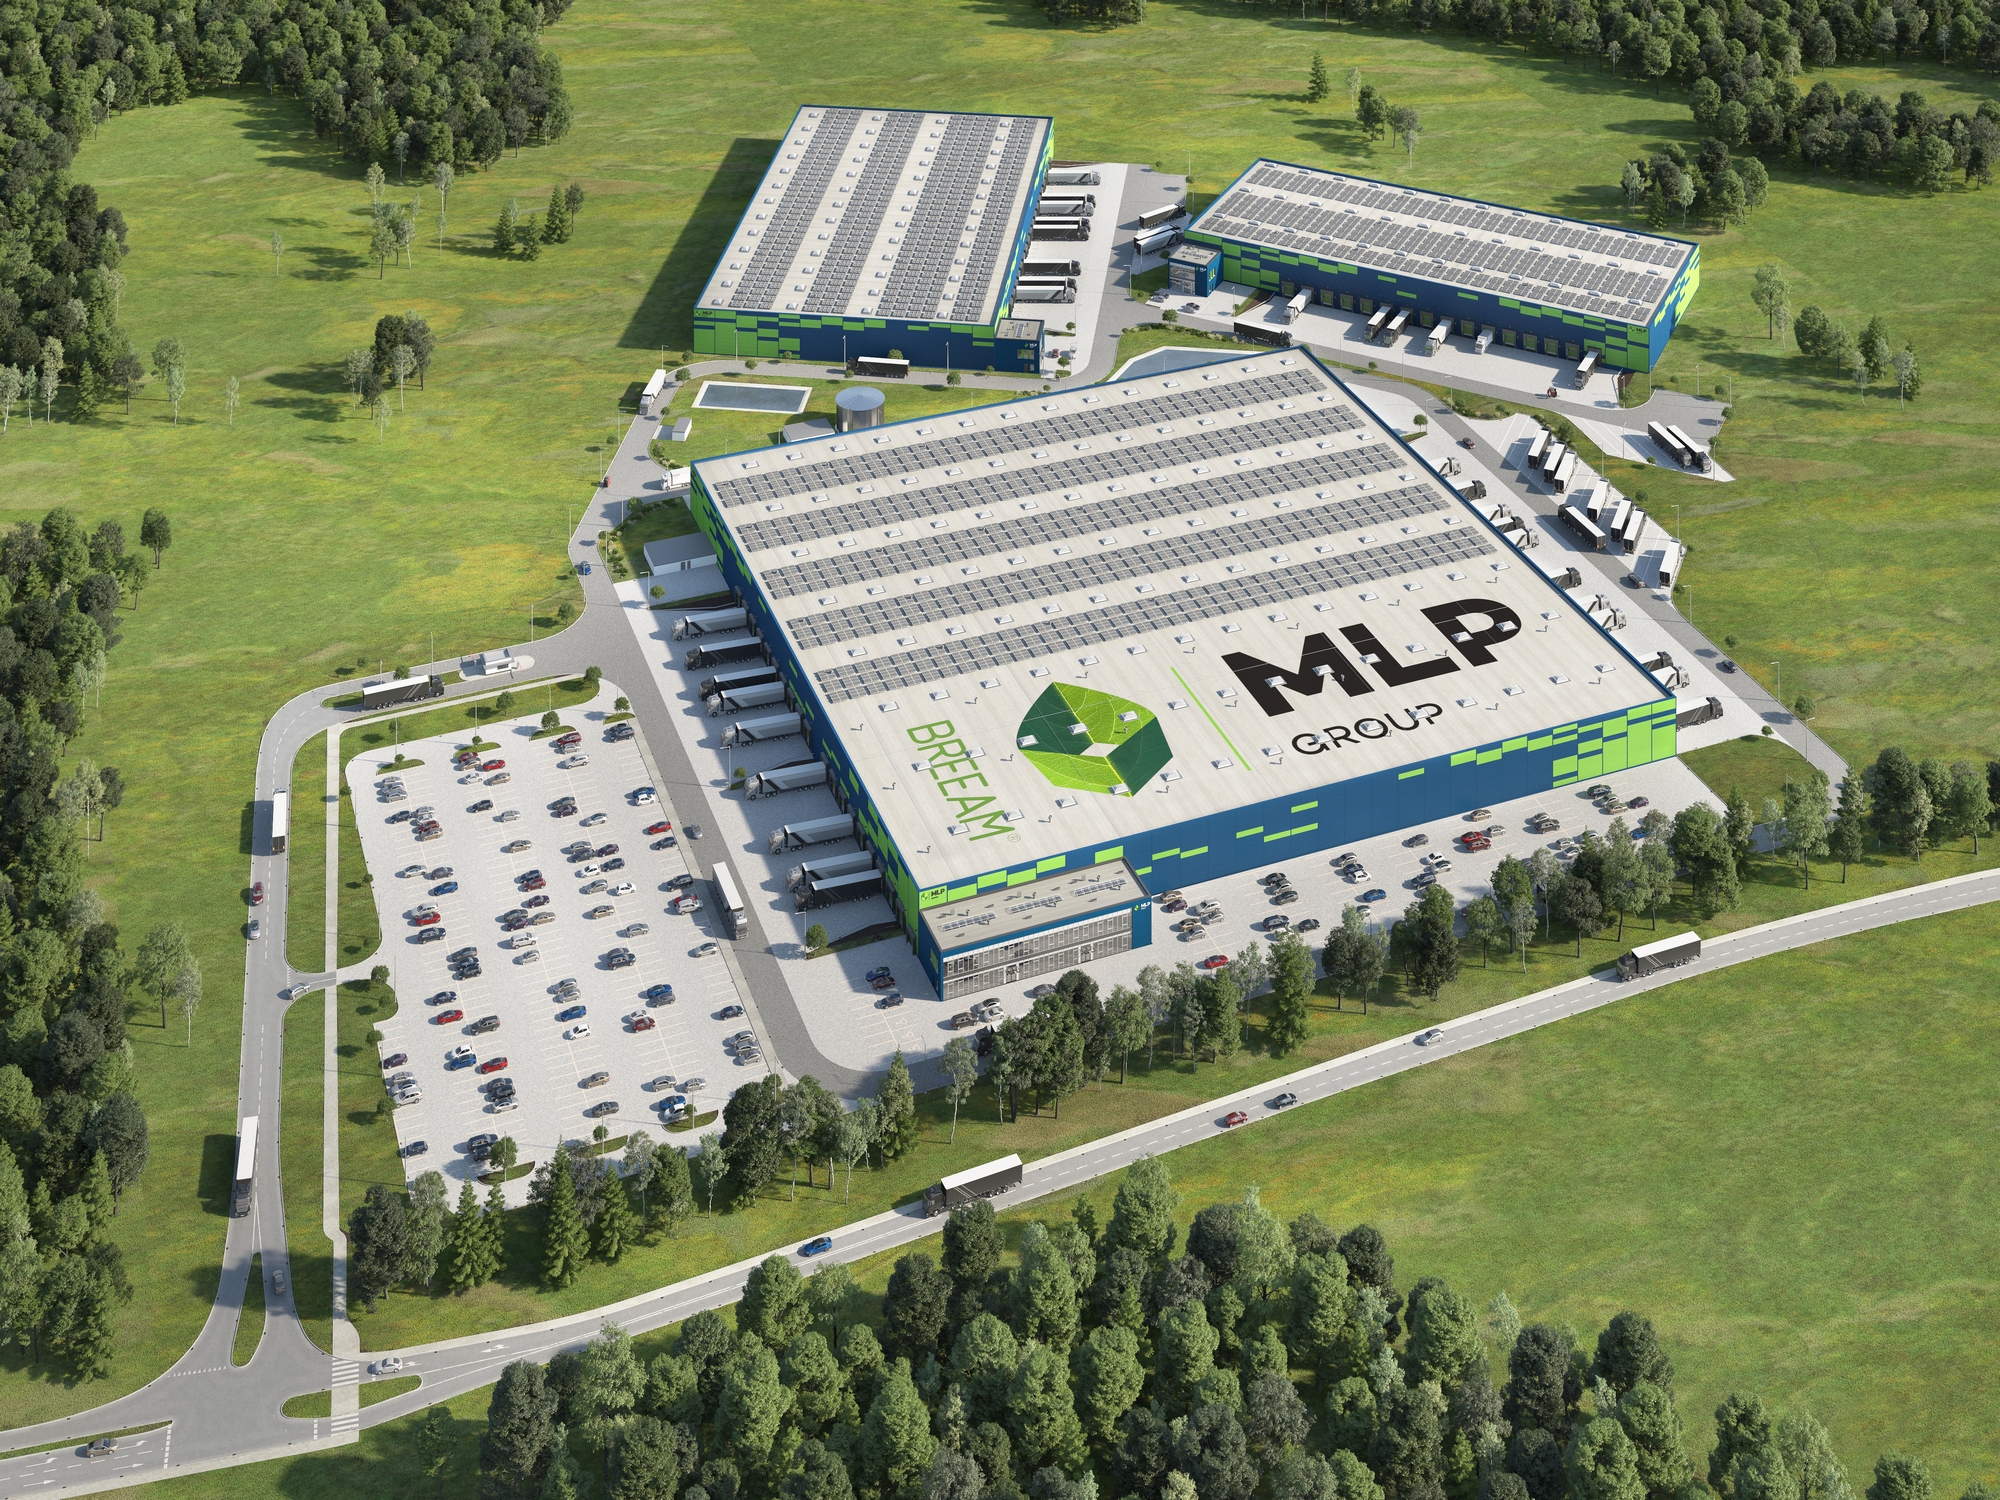 MLP Group launches new project in Zgorzelec